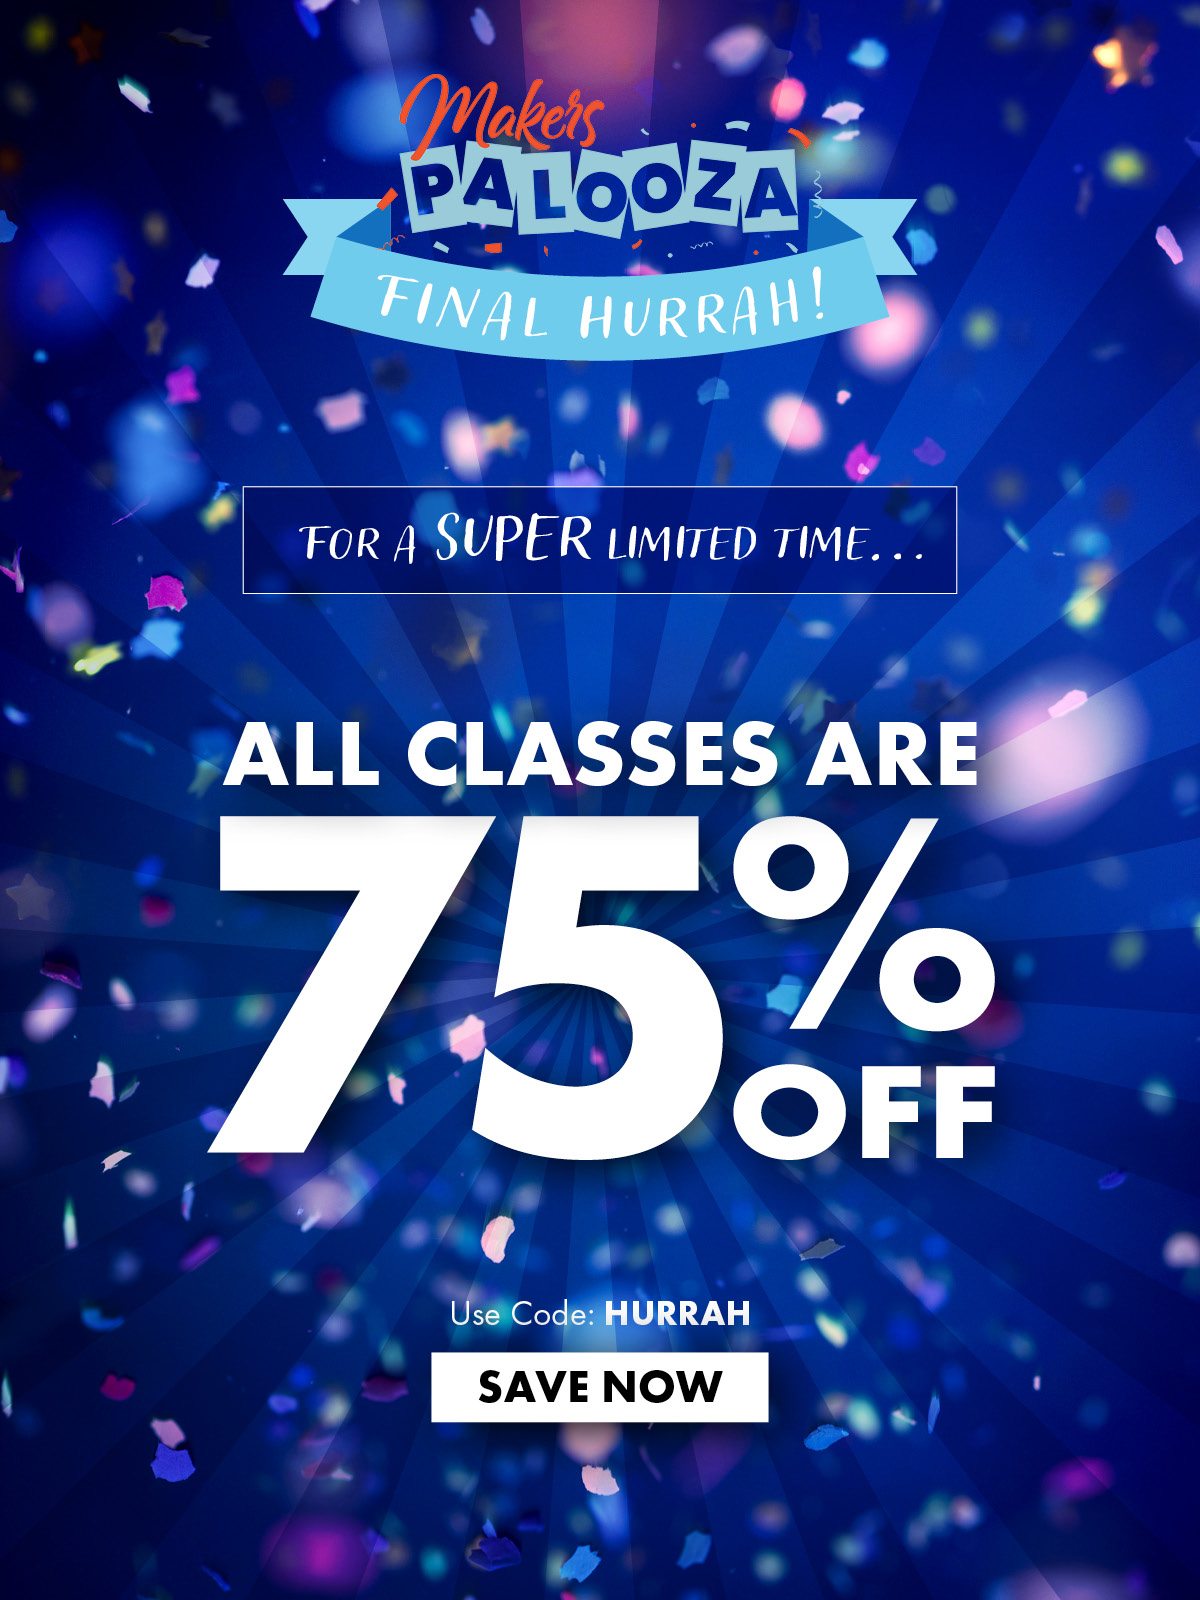 Makers Palooza Final Hurrah! For a SUPER limited time… All Classes are 75% Off! Use Code: HURRAH